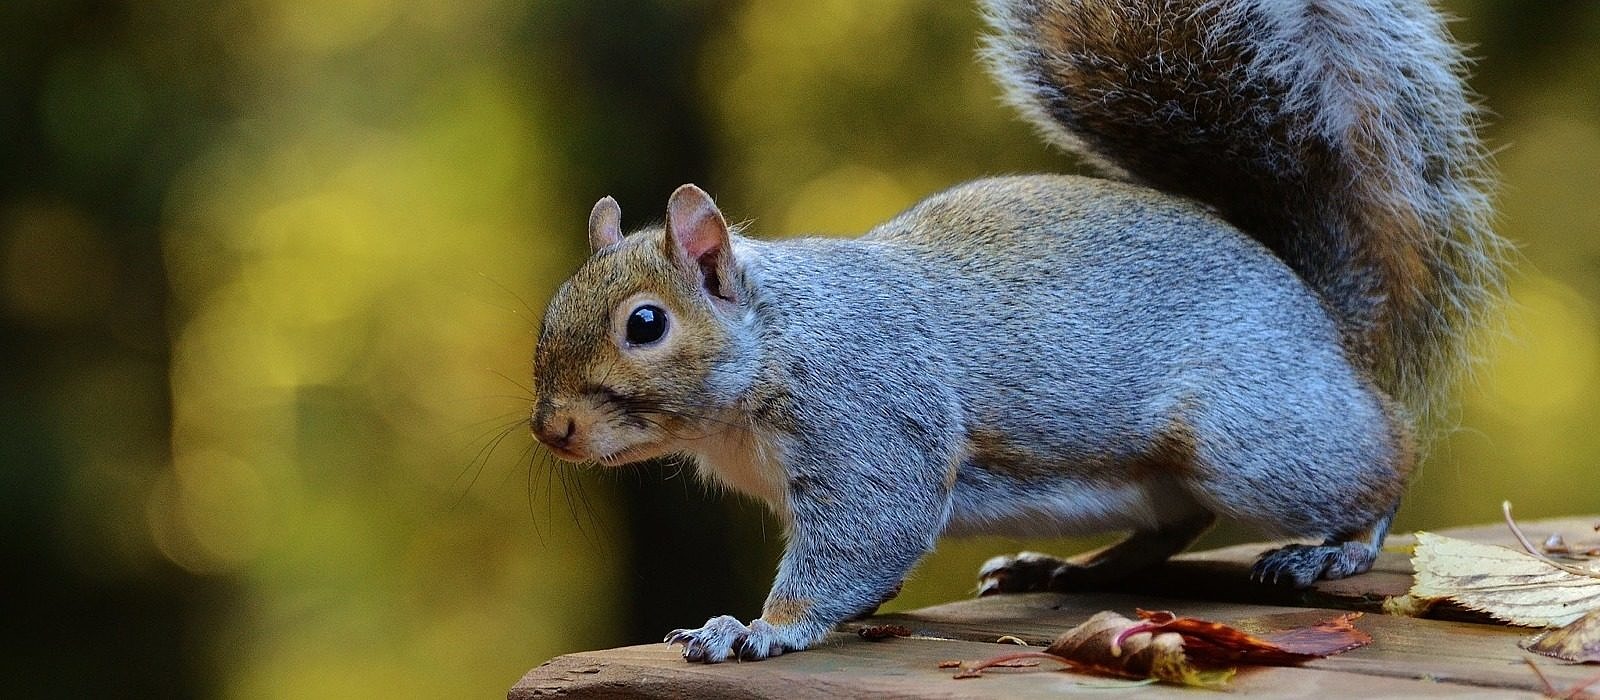 A gray squirrel pauses in autumn light. (photo © Jacob McGinnis via the Flickr Creative Commons)